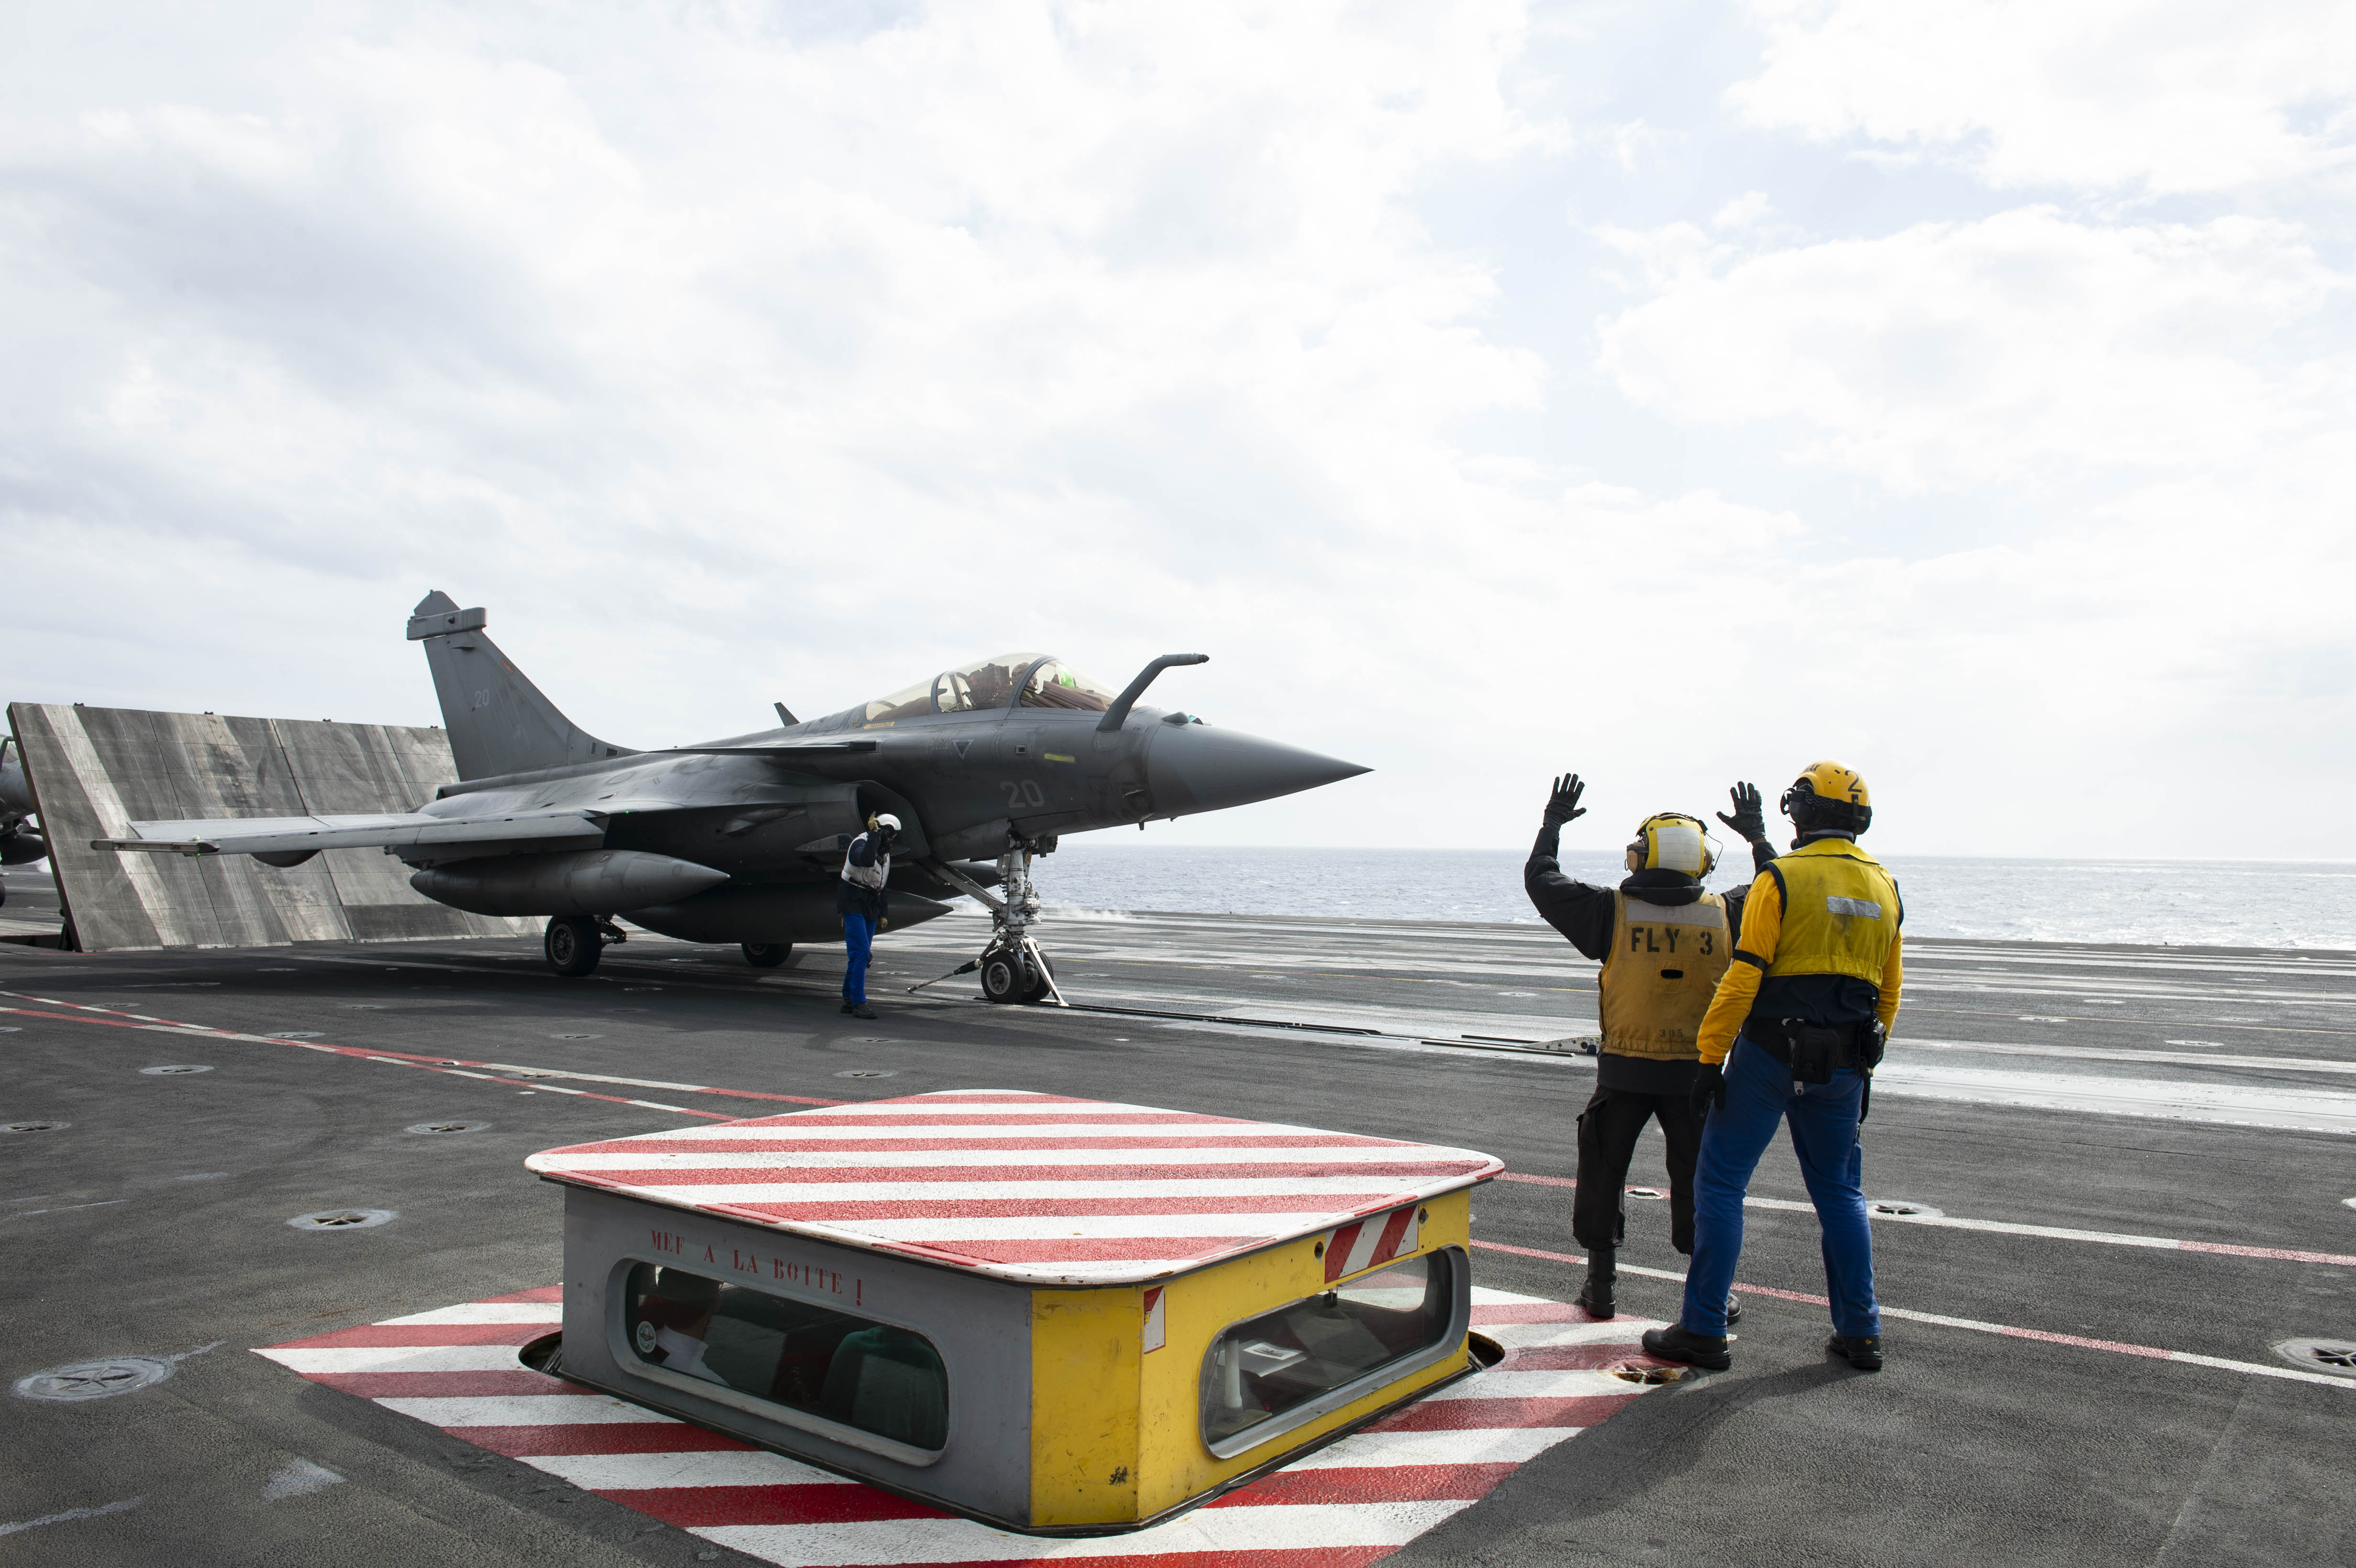 Aviation Boatswain's Mate (Handling) 3rd Class Lauret Price, from Cleveland, left, and a member of the French Marine Nationale, spot a French Dassault Rafale M fighter jet on the flight deck aboard the French aircraft carrier Charles de Gaulle (R 91) while conducting interoperability exercises with the aircraft carrier USS Dwight D. Eisenhower (CVN 69).